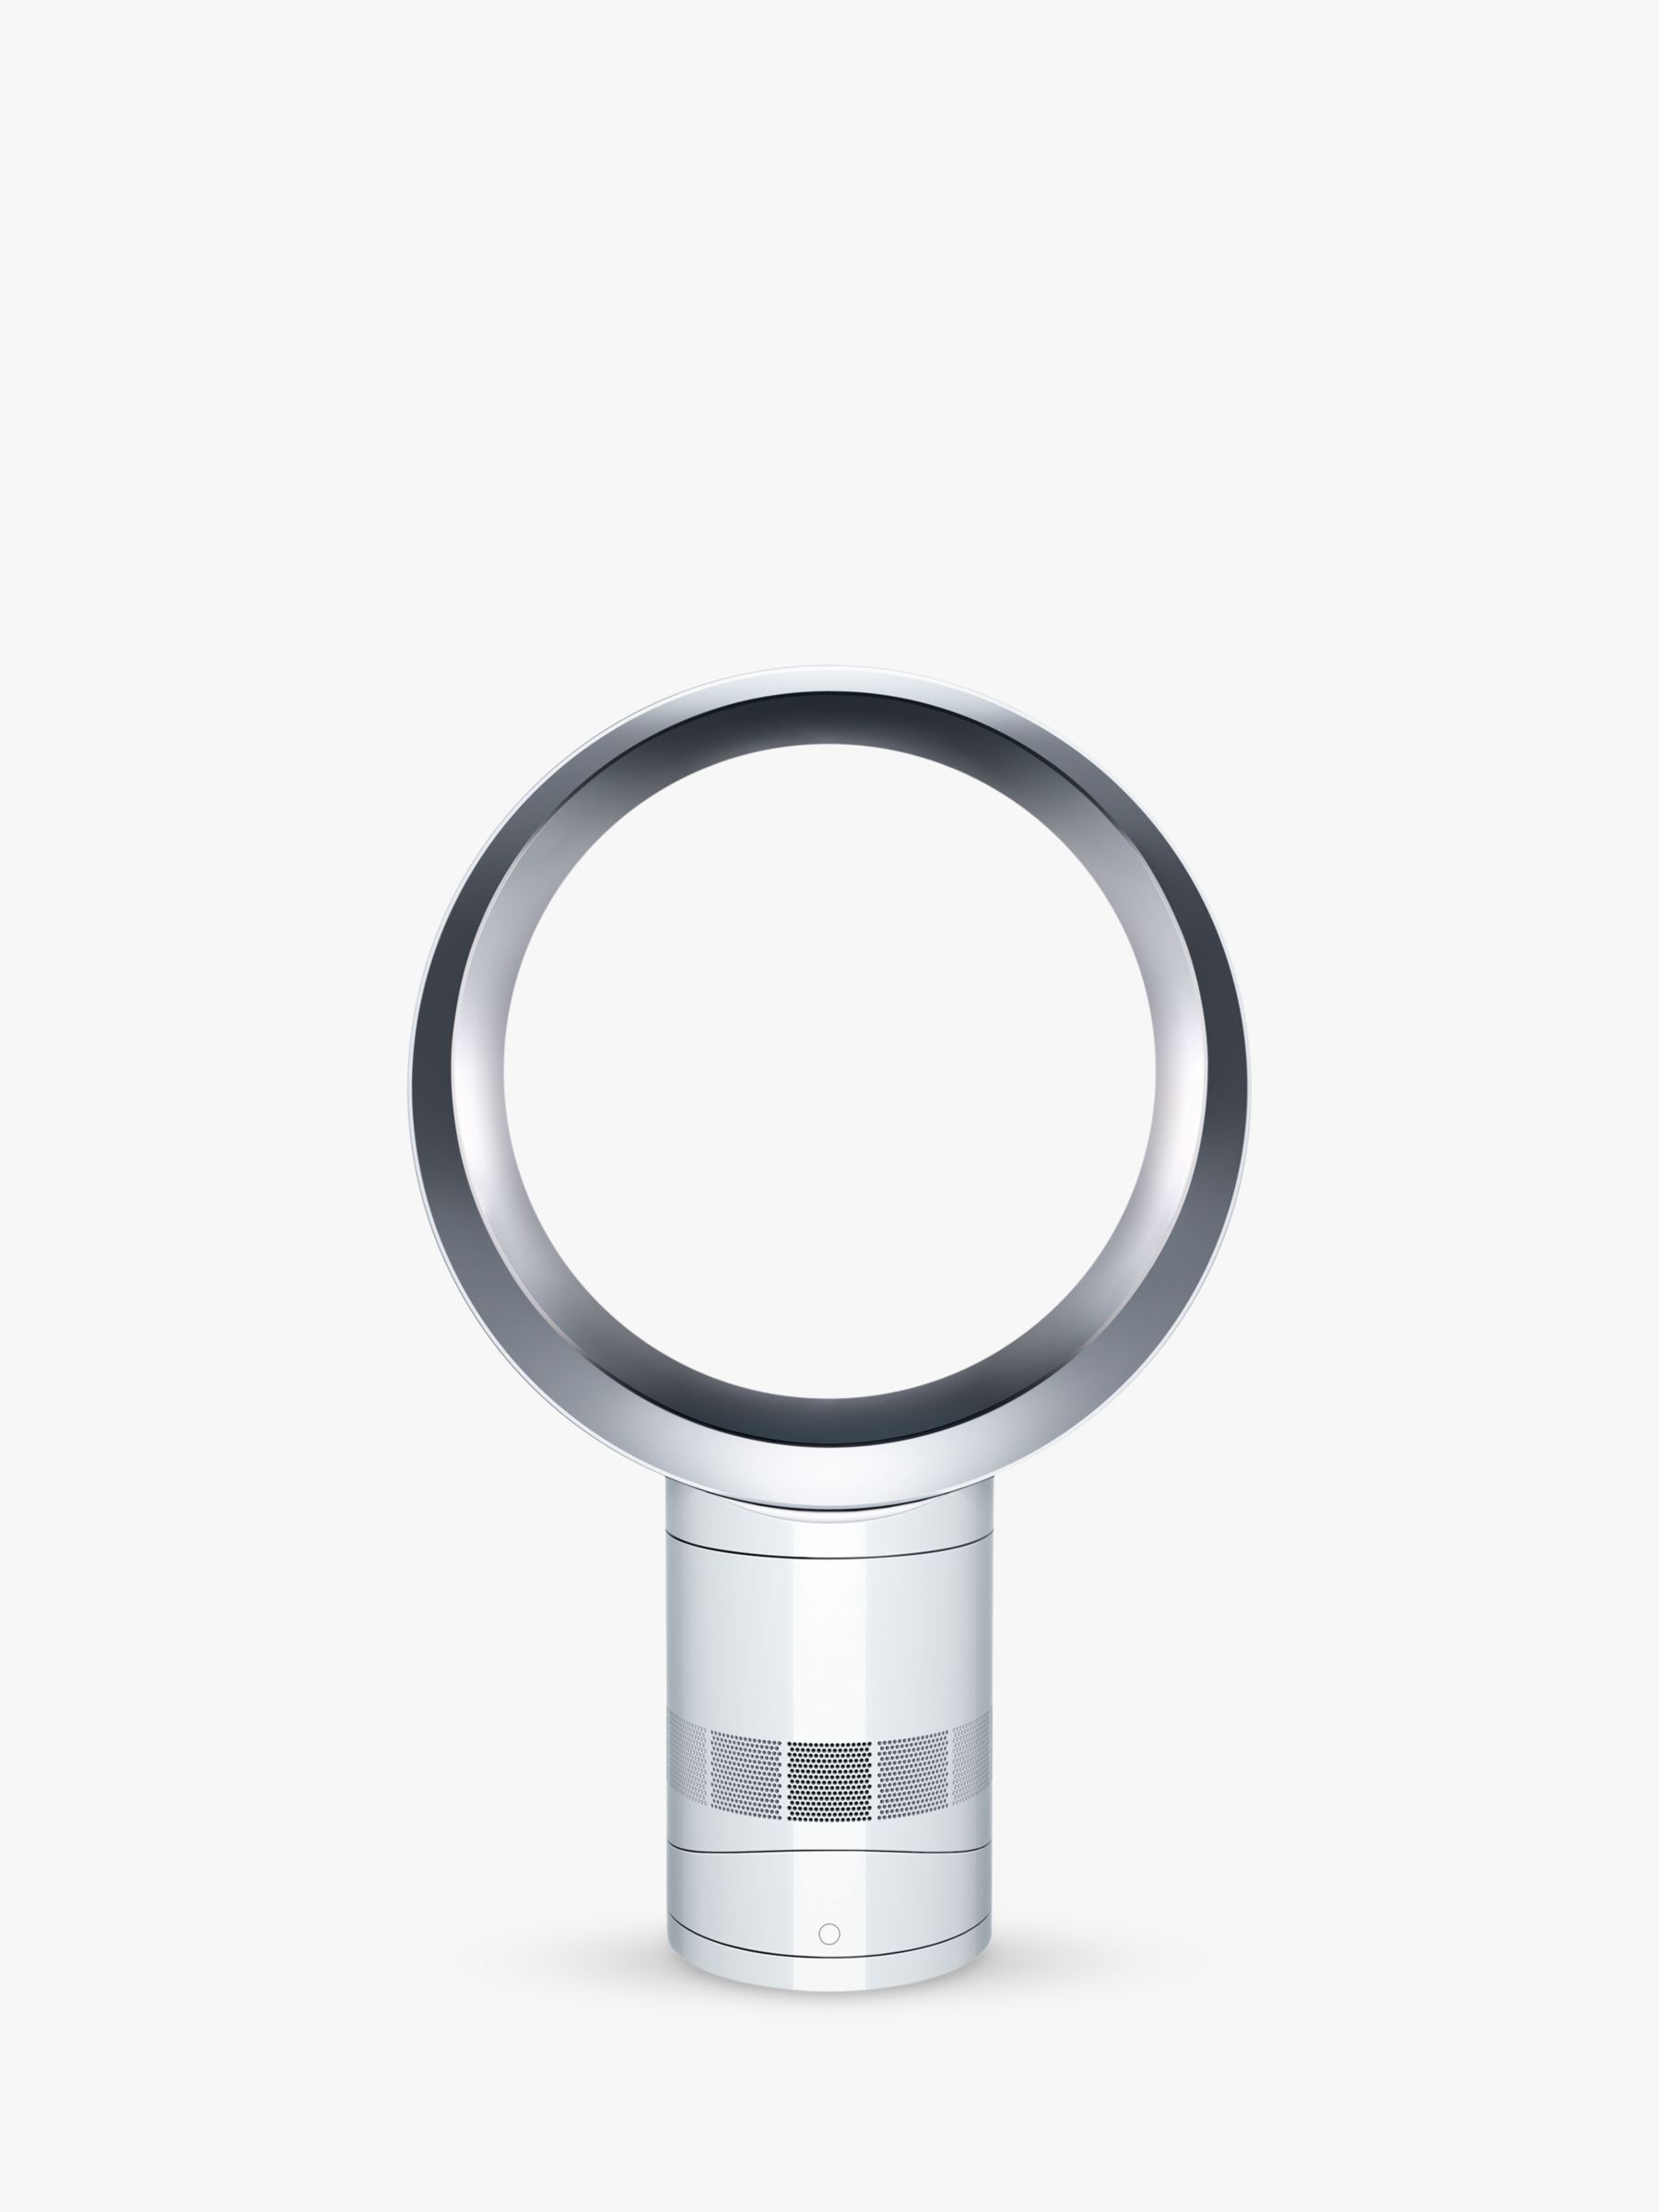 Dyson Pure Cool review: Are the Dyson fans worth the money?